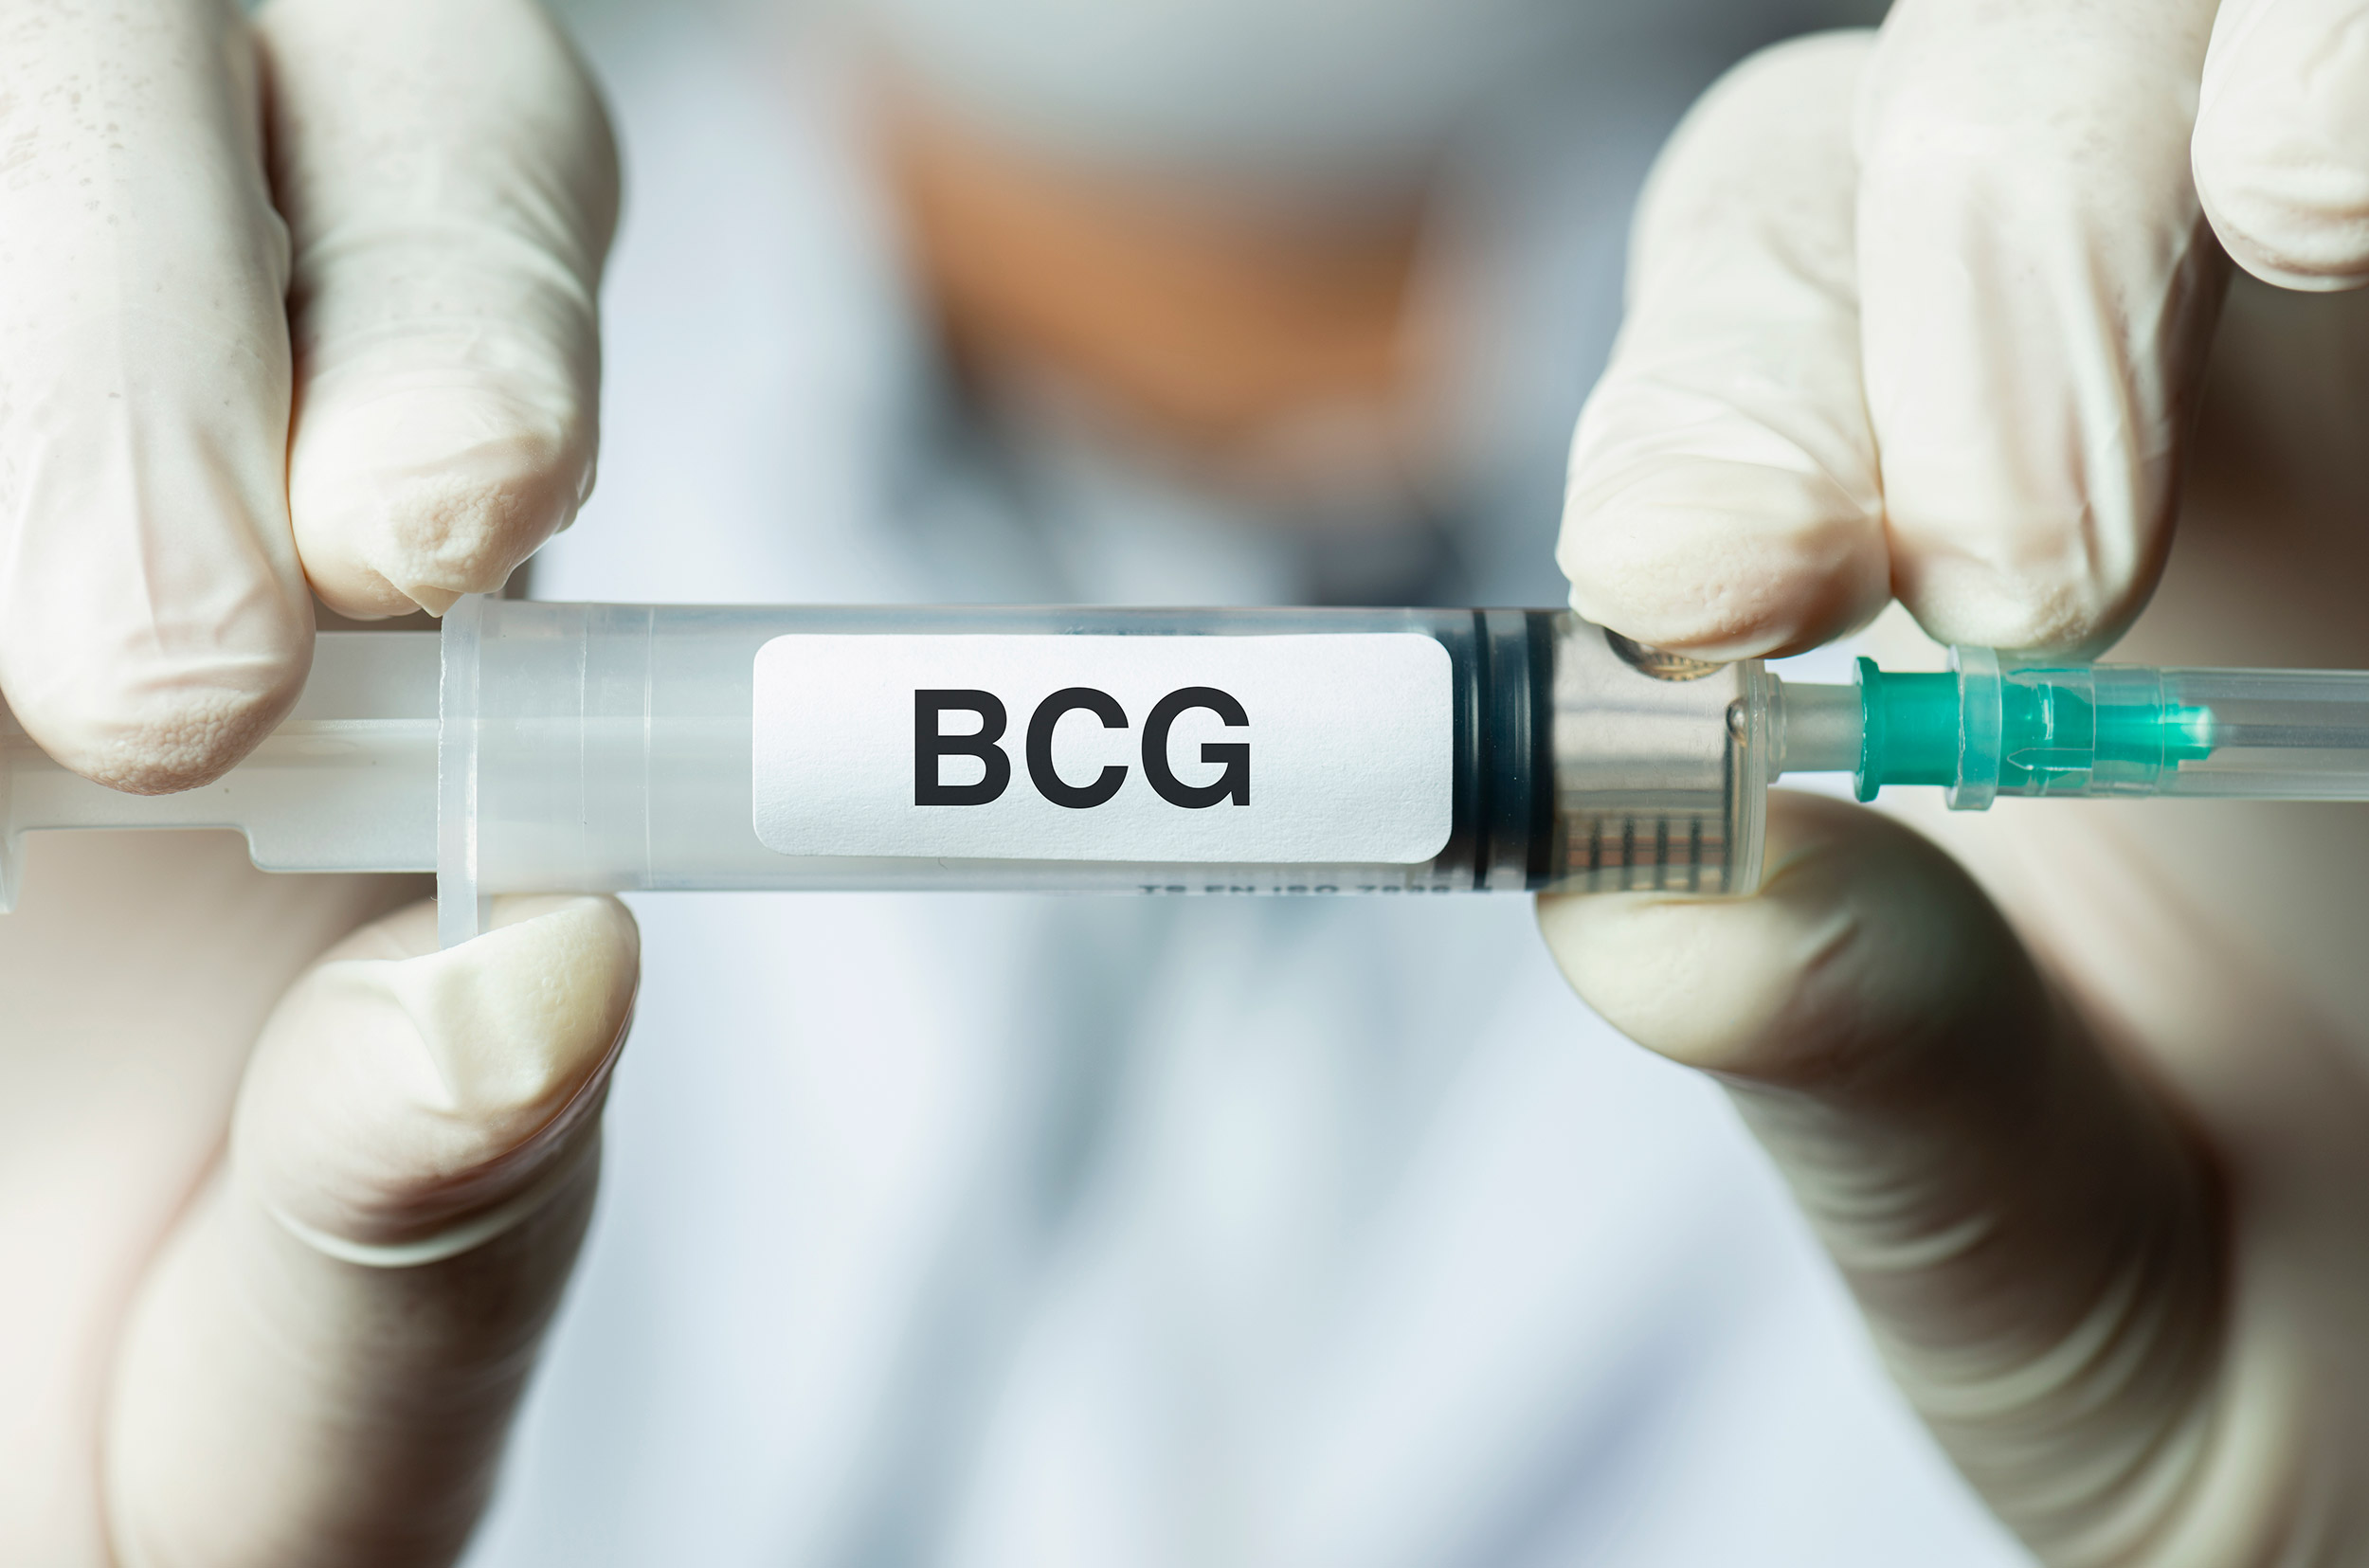 How Innovative Bladder Cancer Treatments Can Help Overcome BCG Shortages